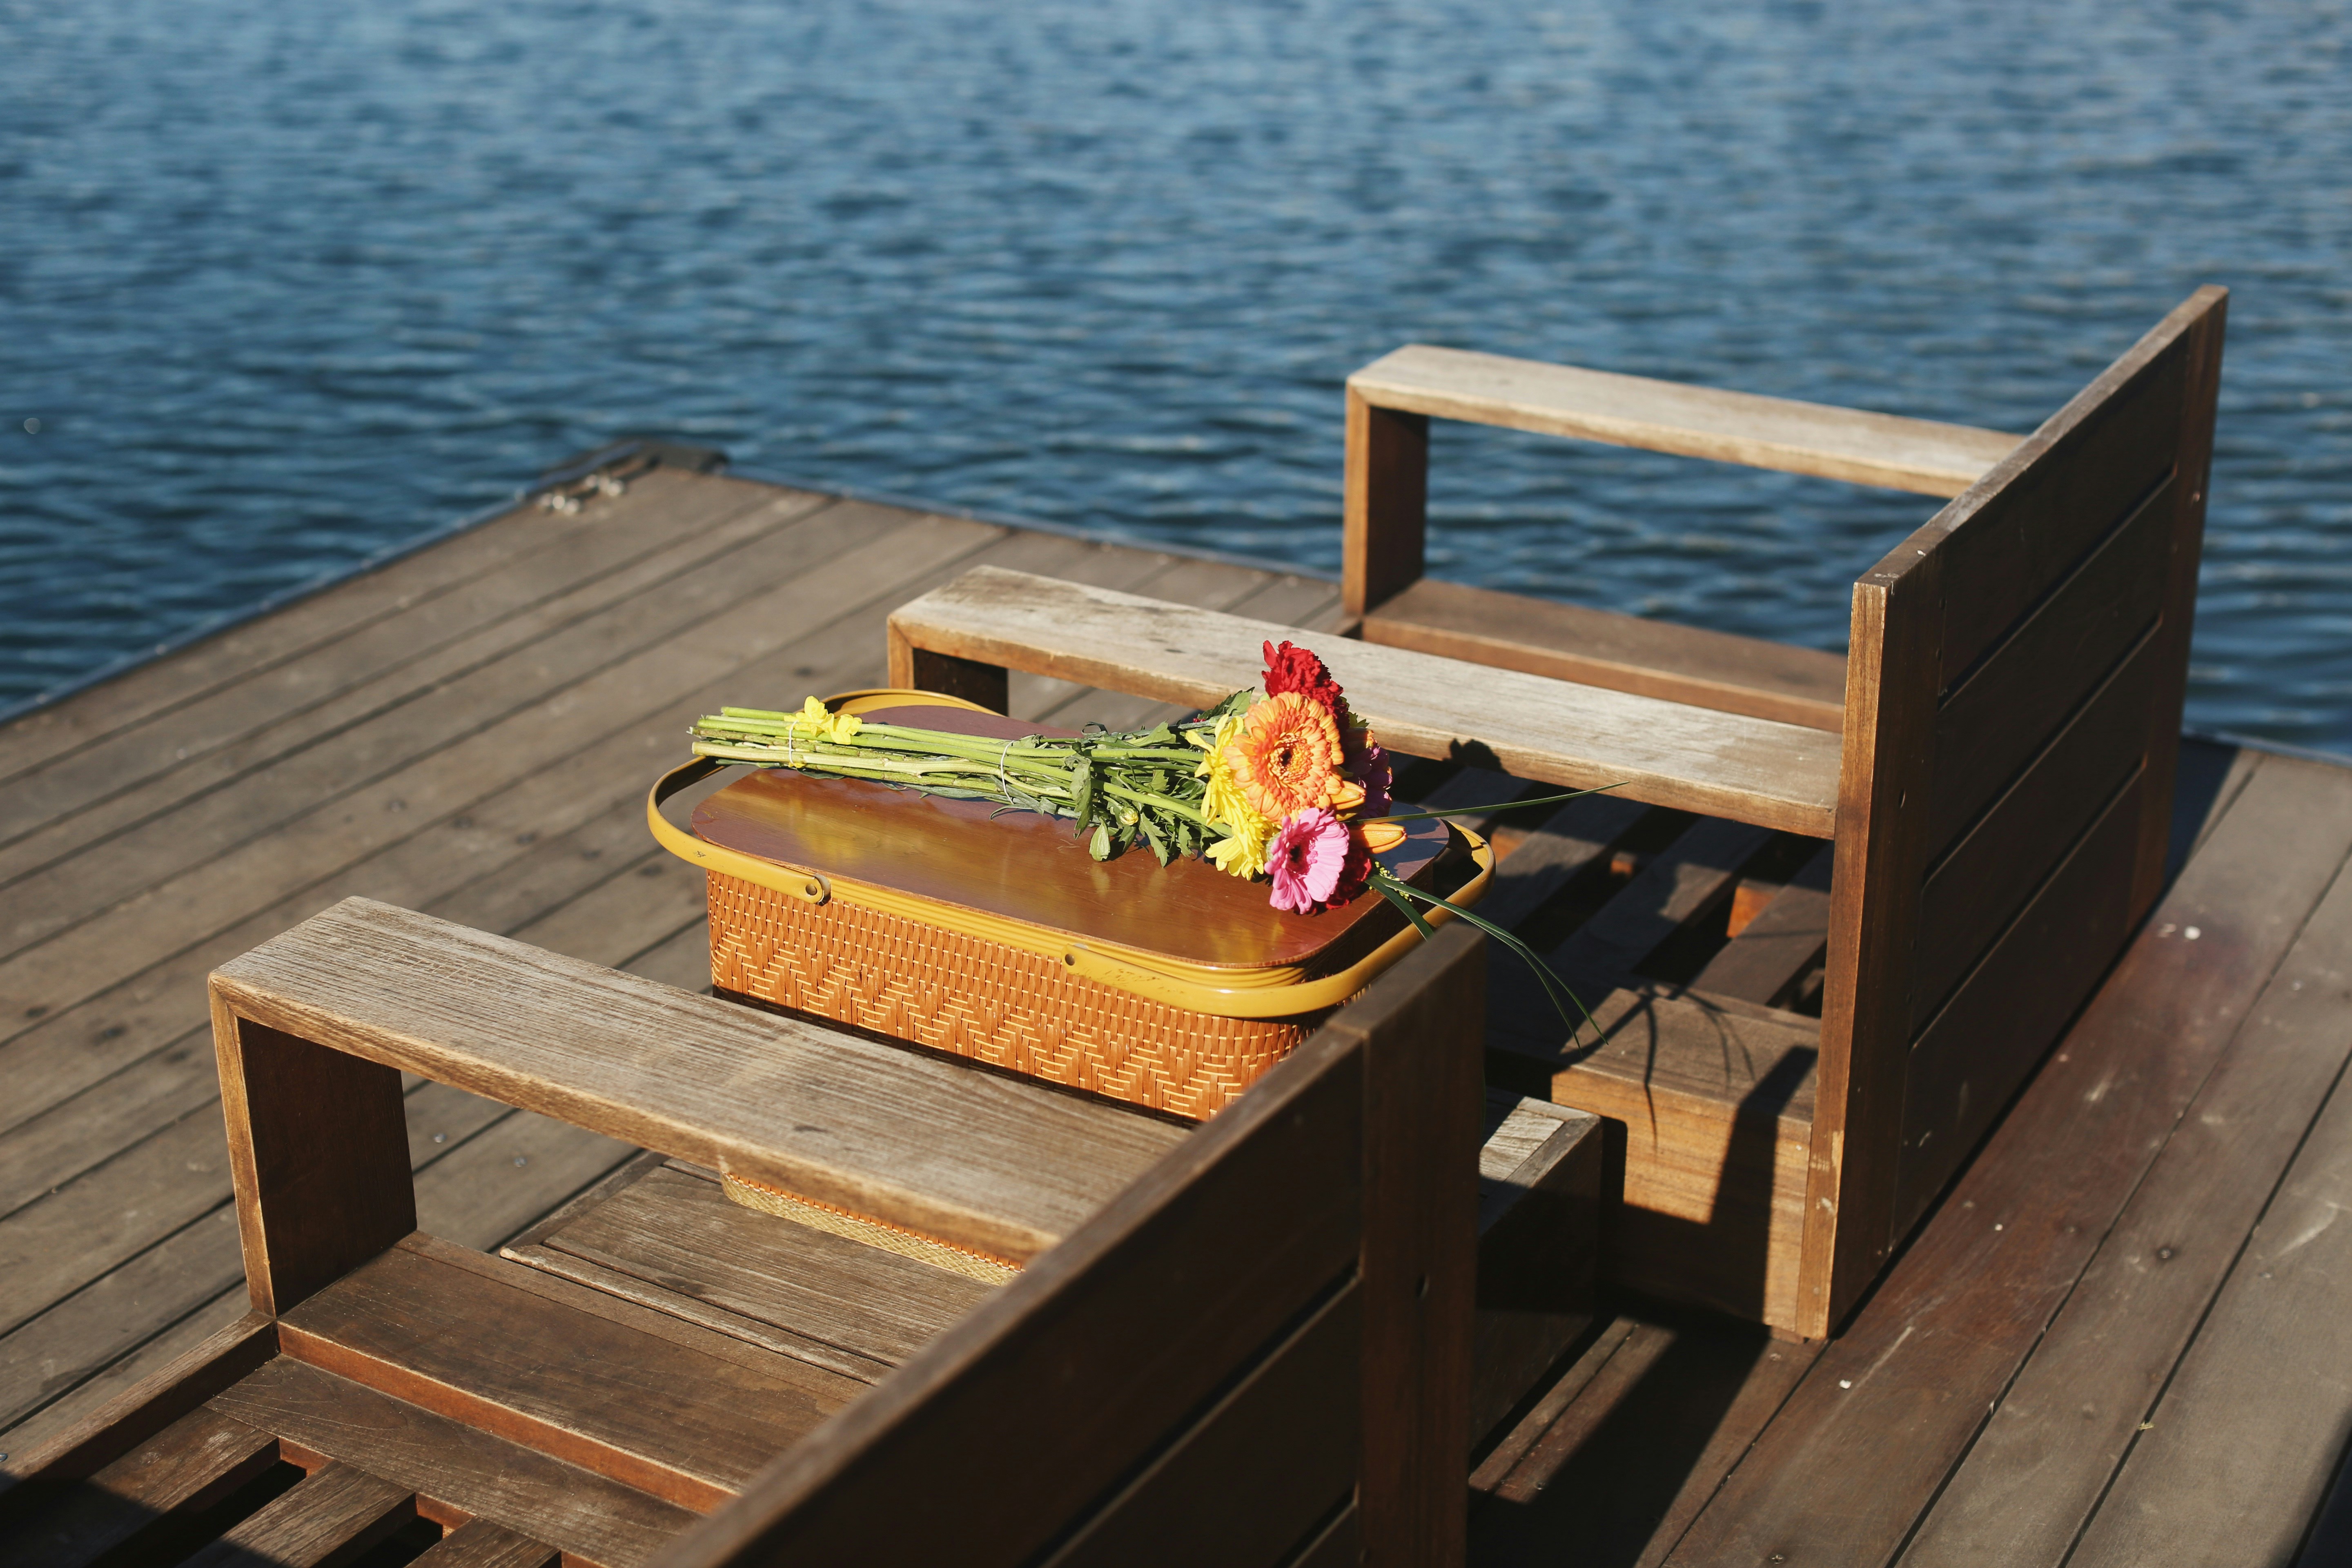 Basket, flower bouquet, and two empty chairs on a pier